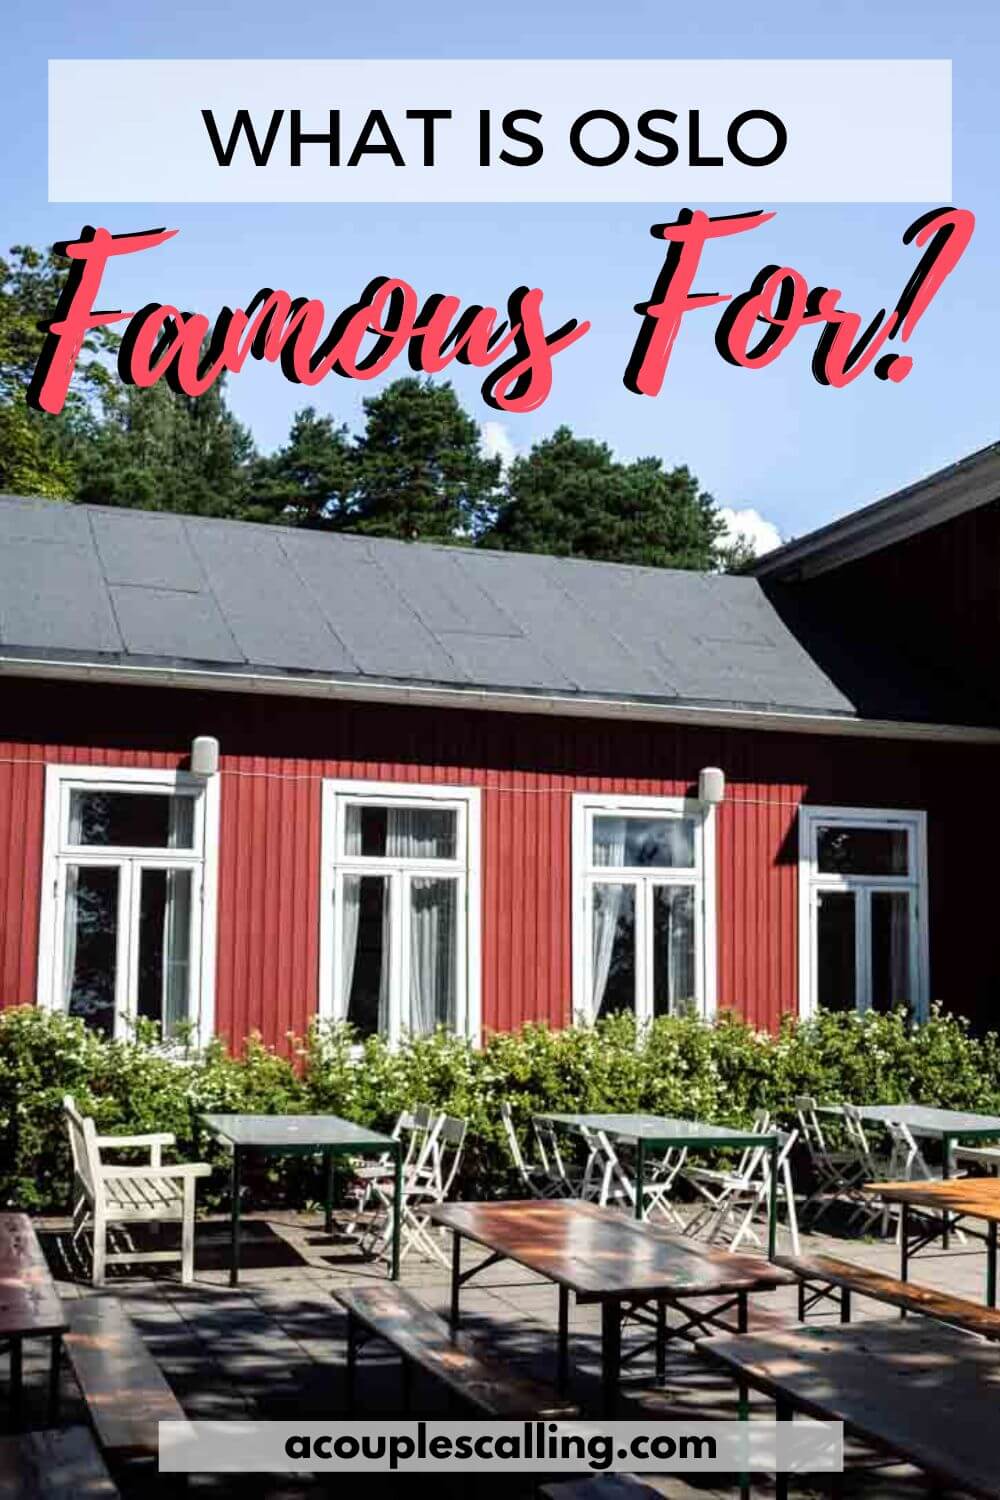 What is Oslo famous for?